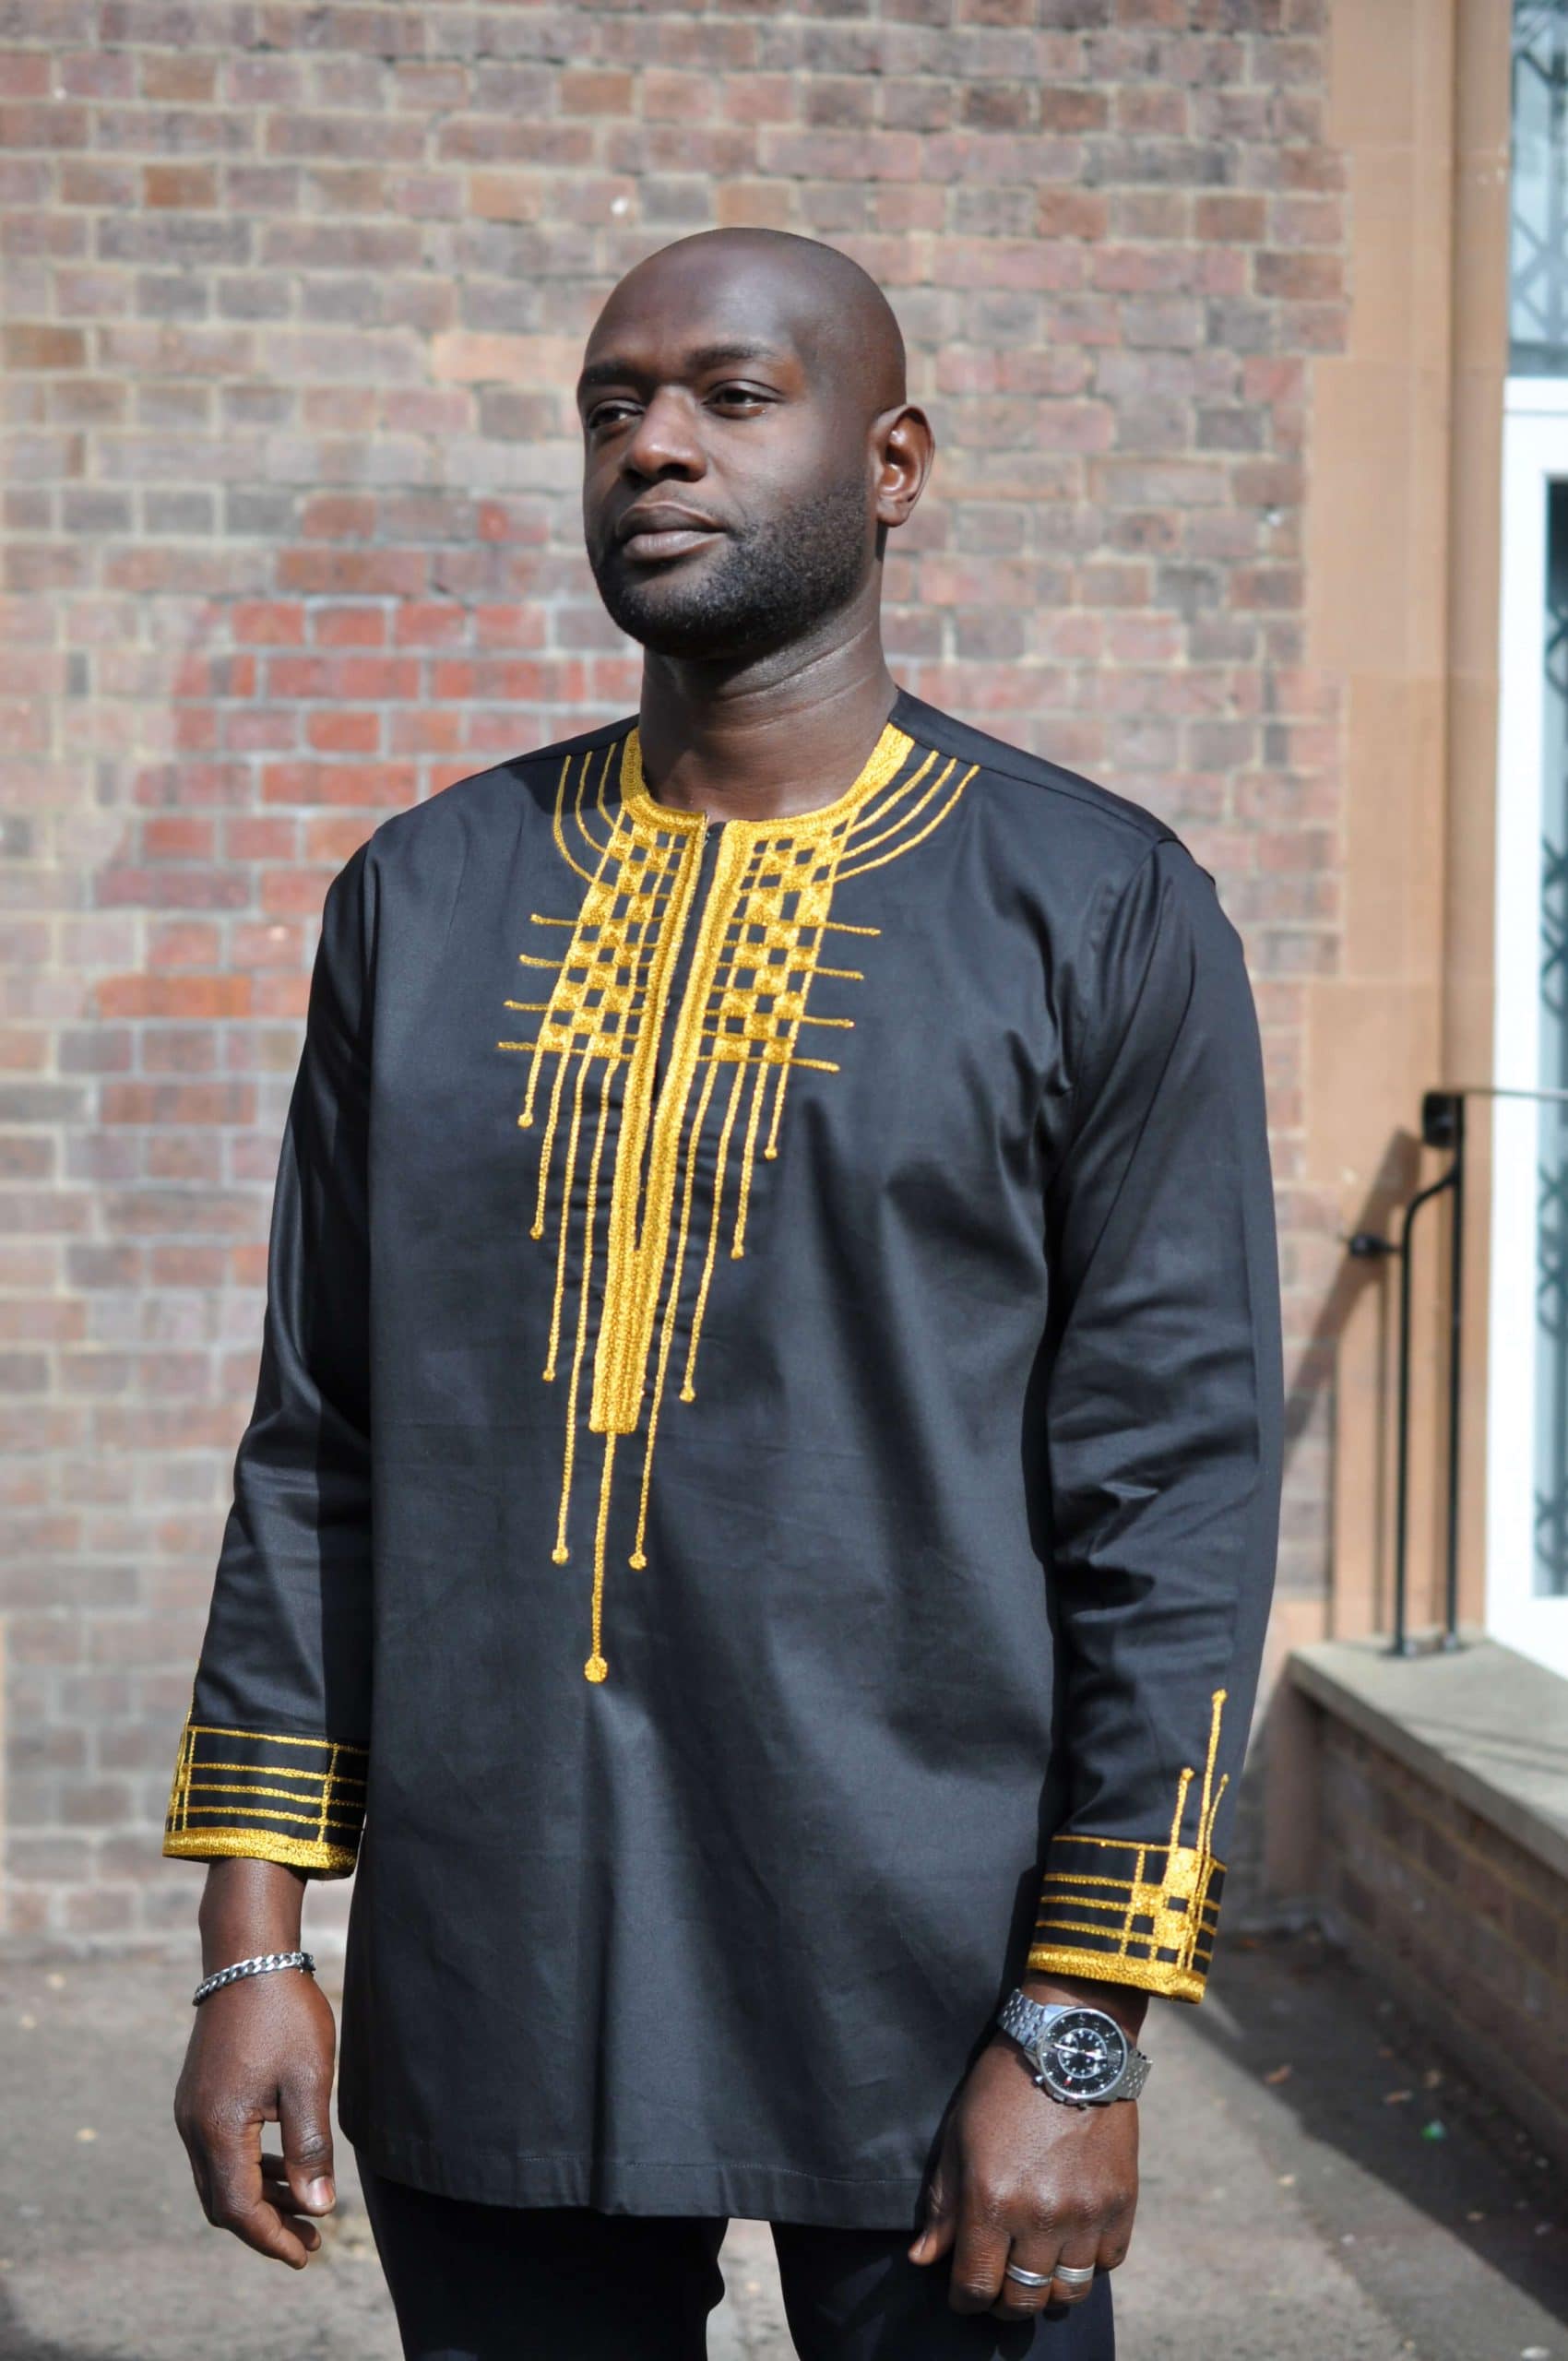 Frontal of model wearing a men's traditional African black shirt with gold embroidery on the neckline and cuffs.